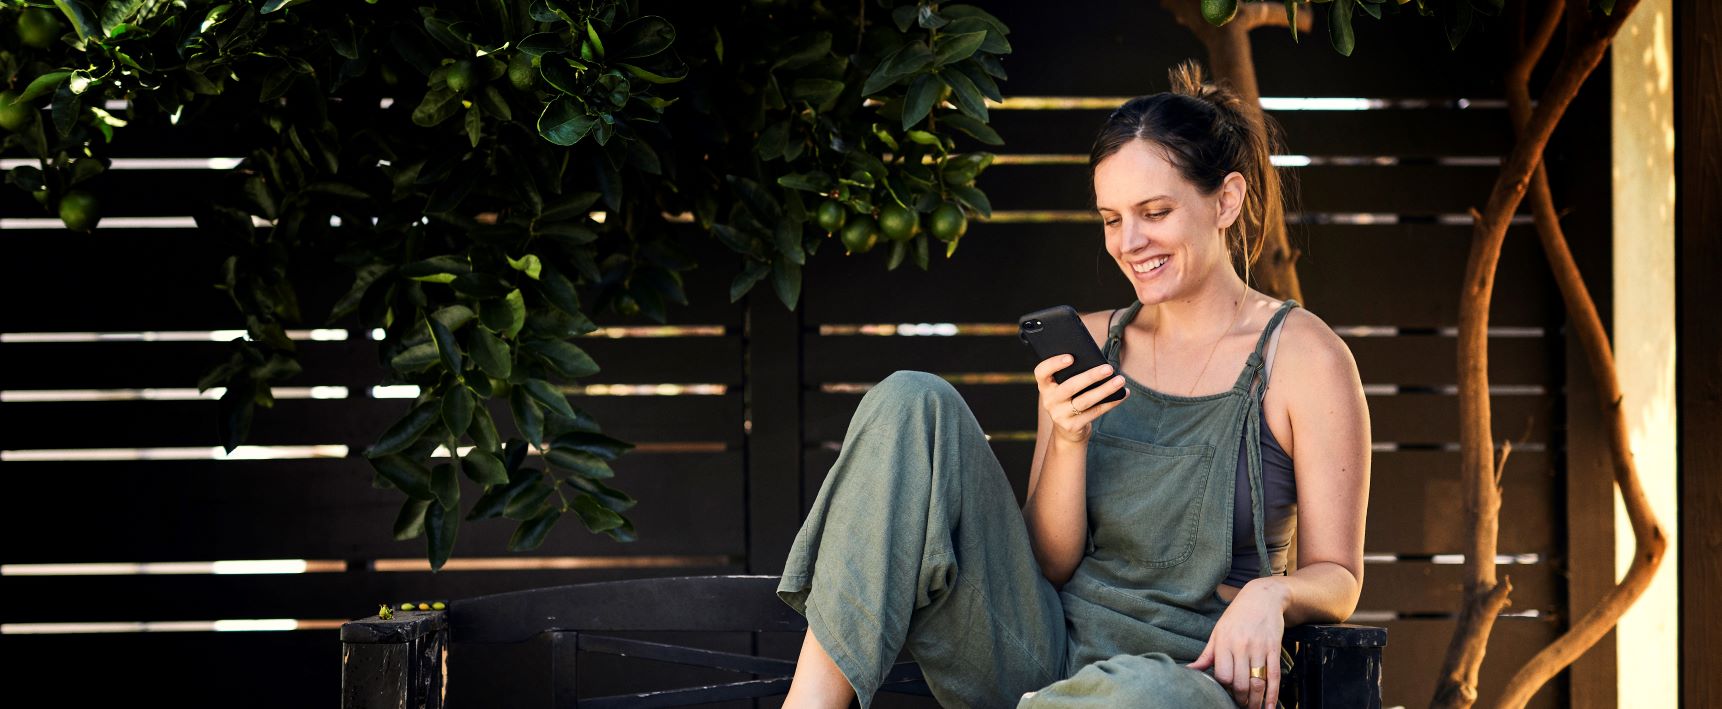 A woman sits and reads her phone